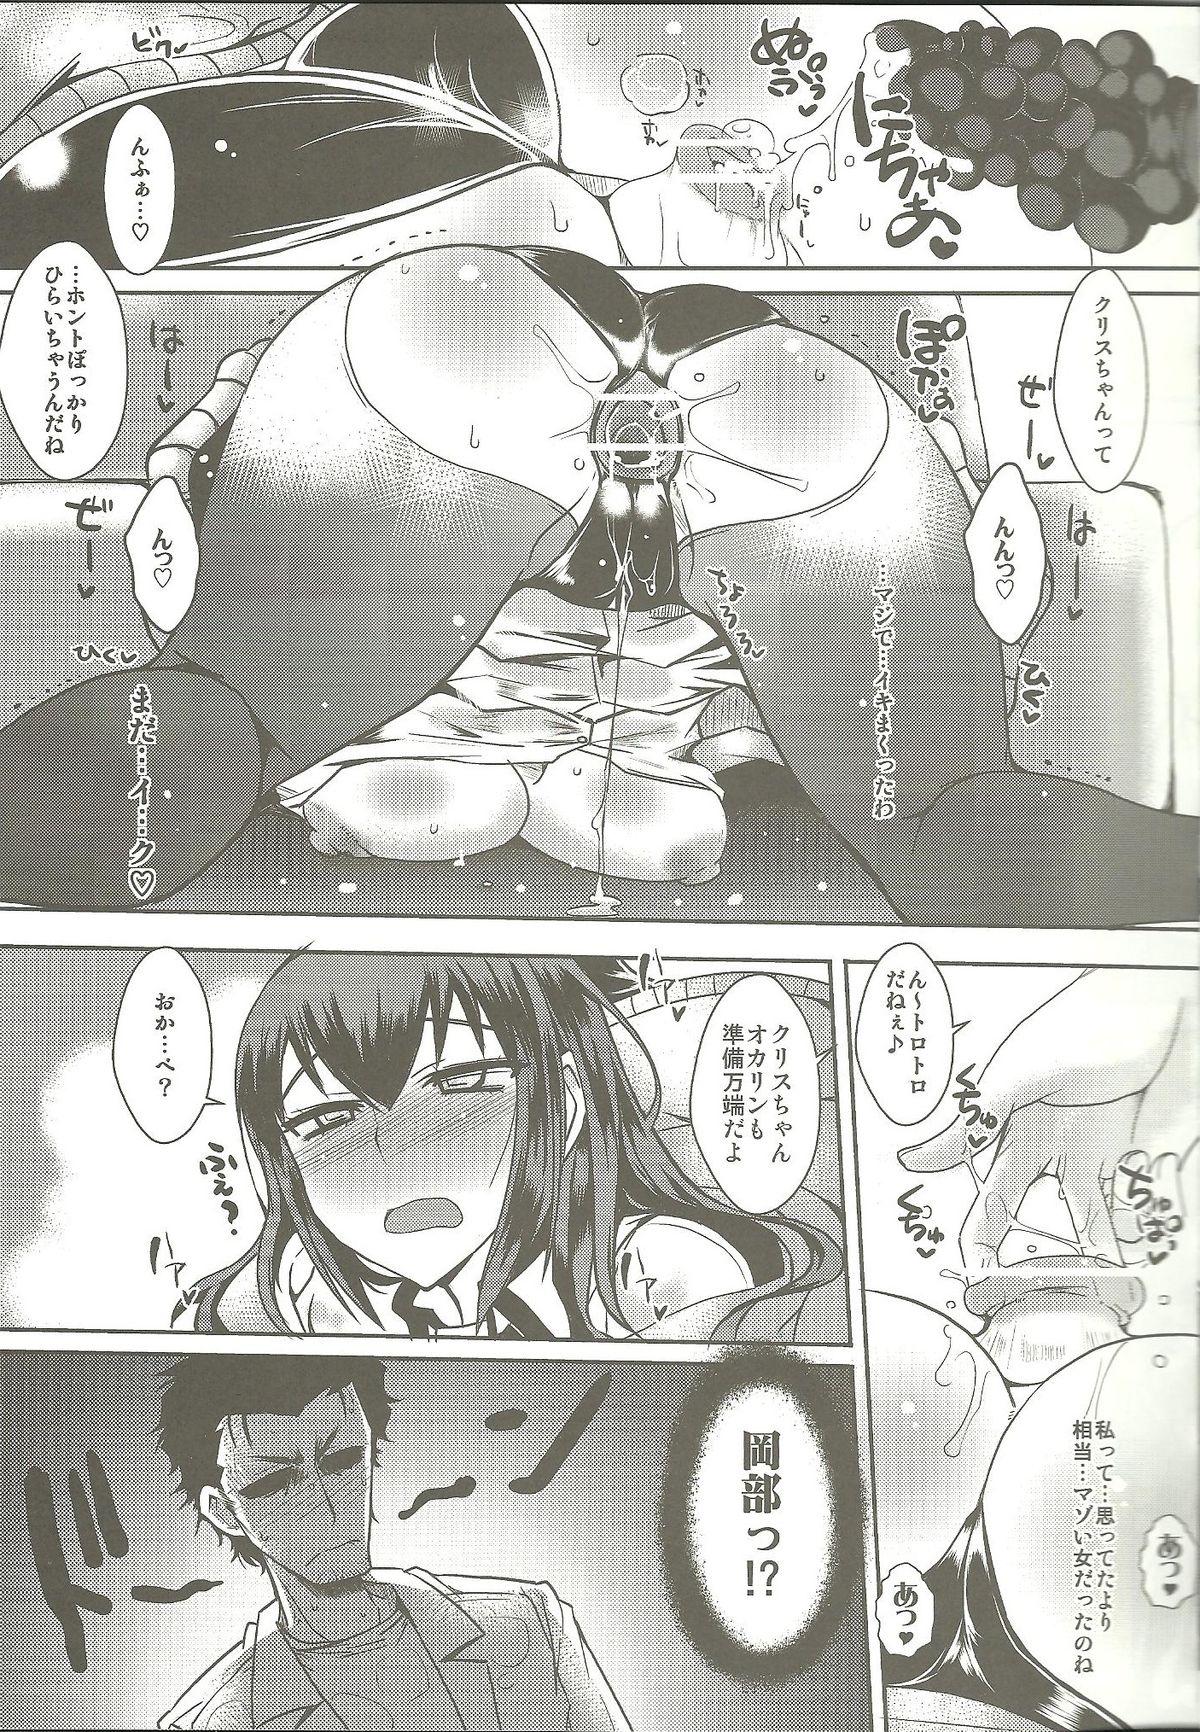 Clit Shirikan Aikou no Sodominists - Steinsgate Classy - Page 8